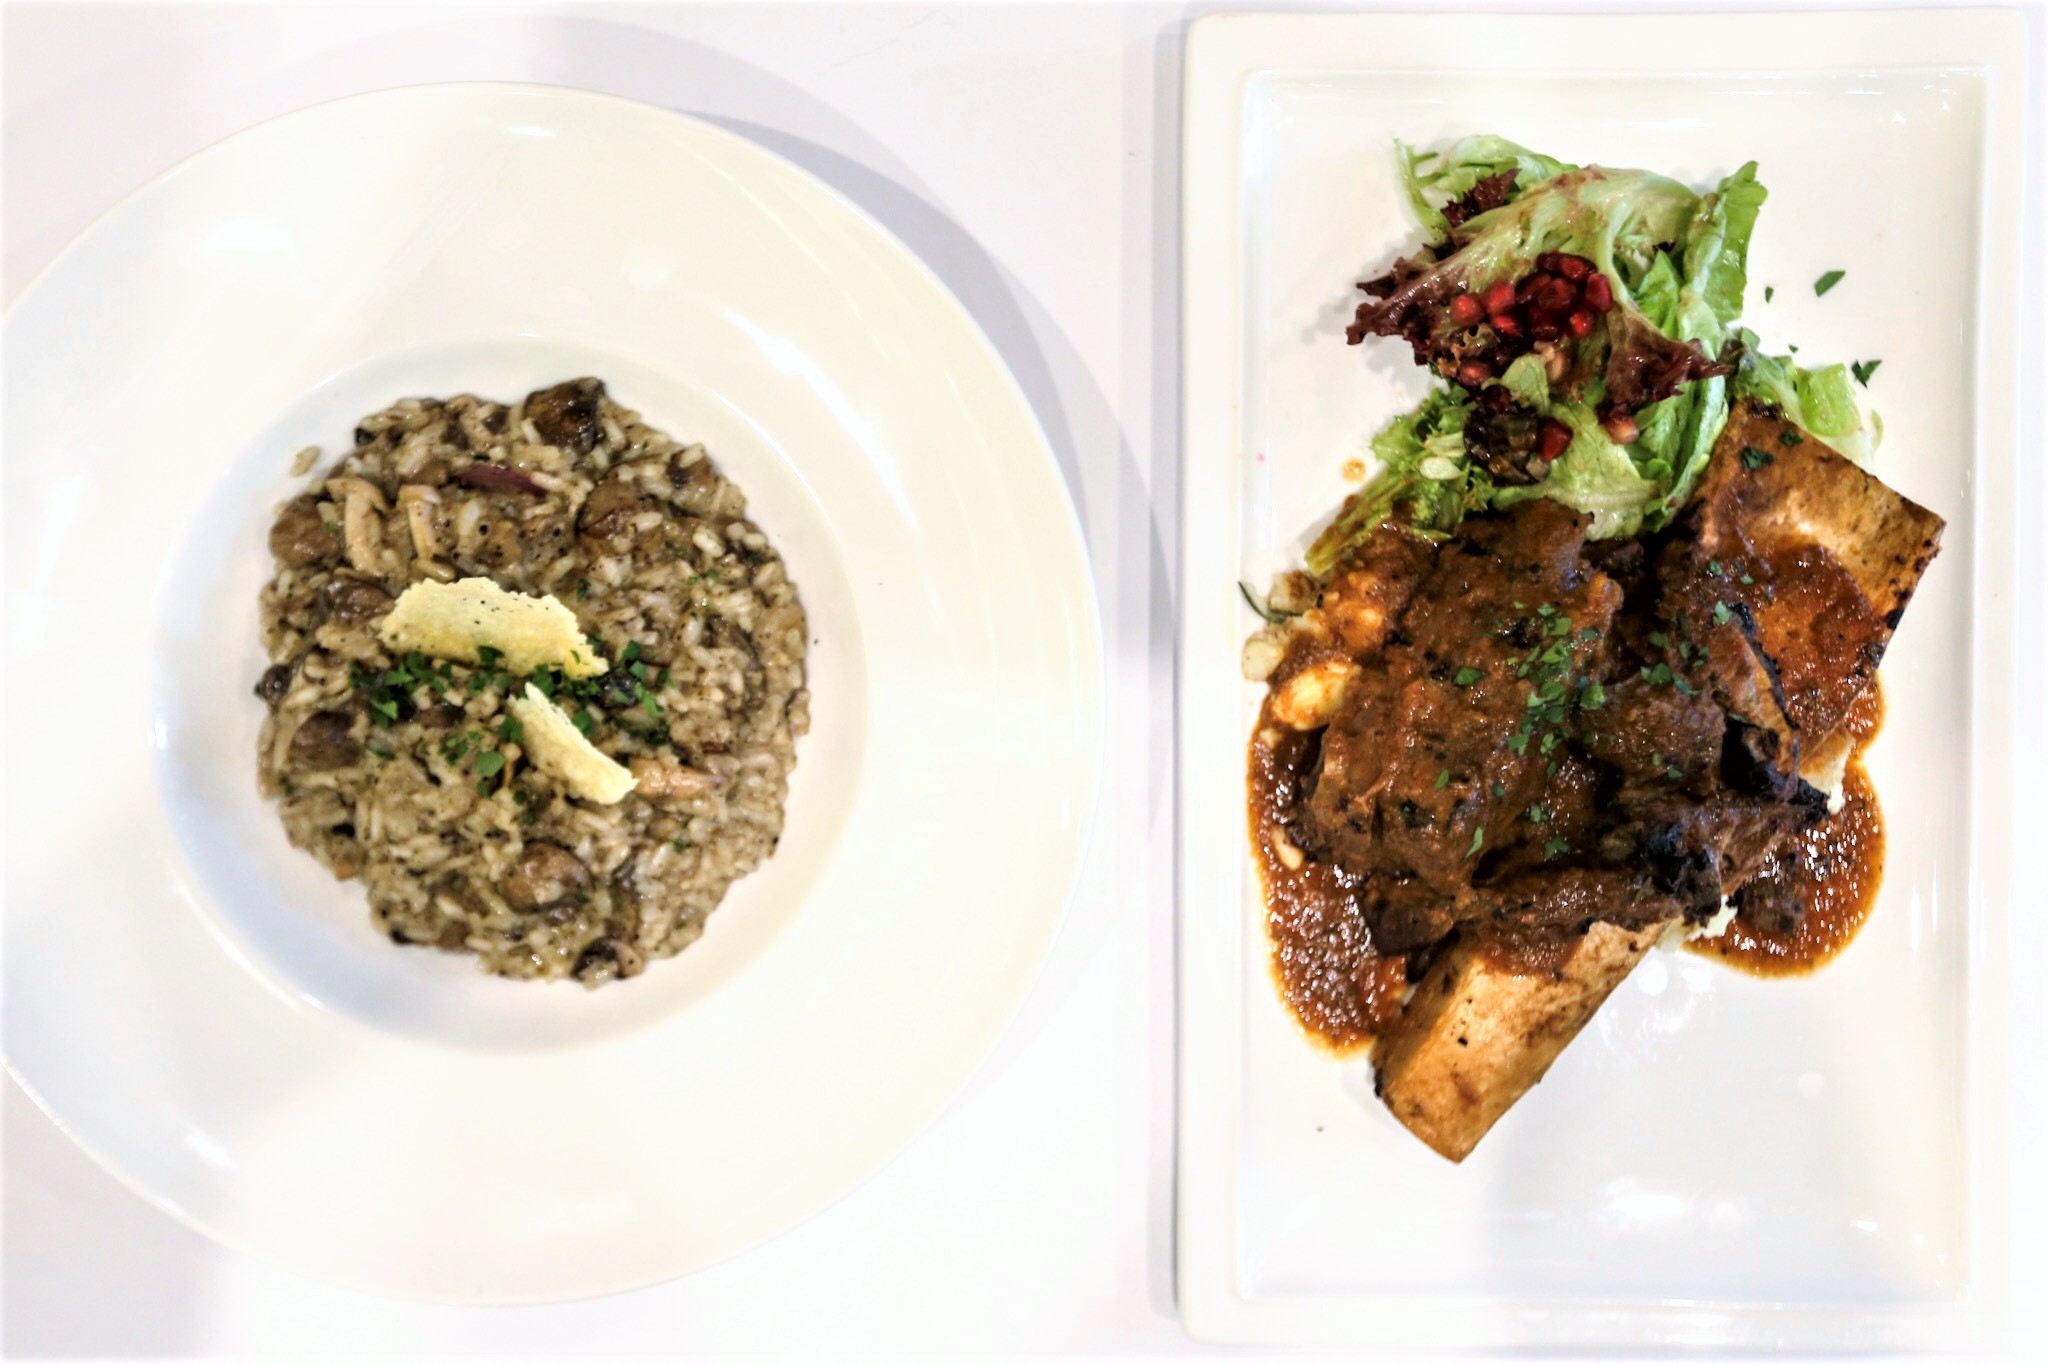 Truffled Mushroom Risotto and Positano Honey Glazed Ribs is comfort food at its best .